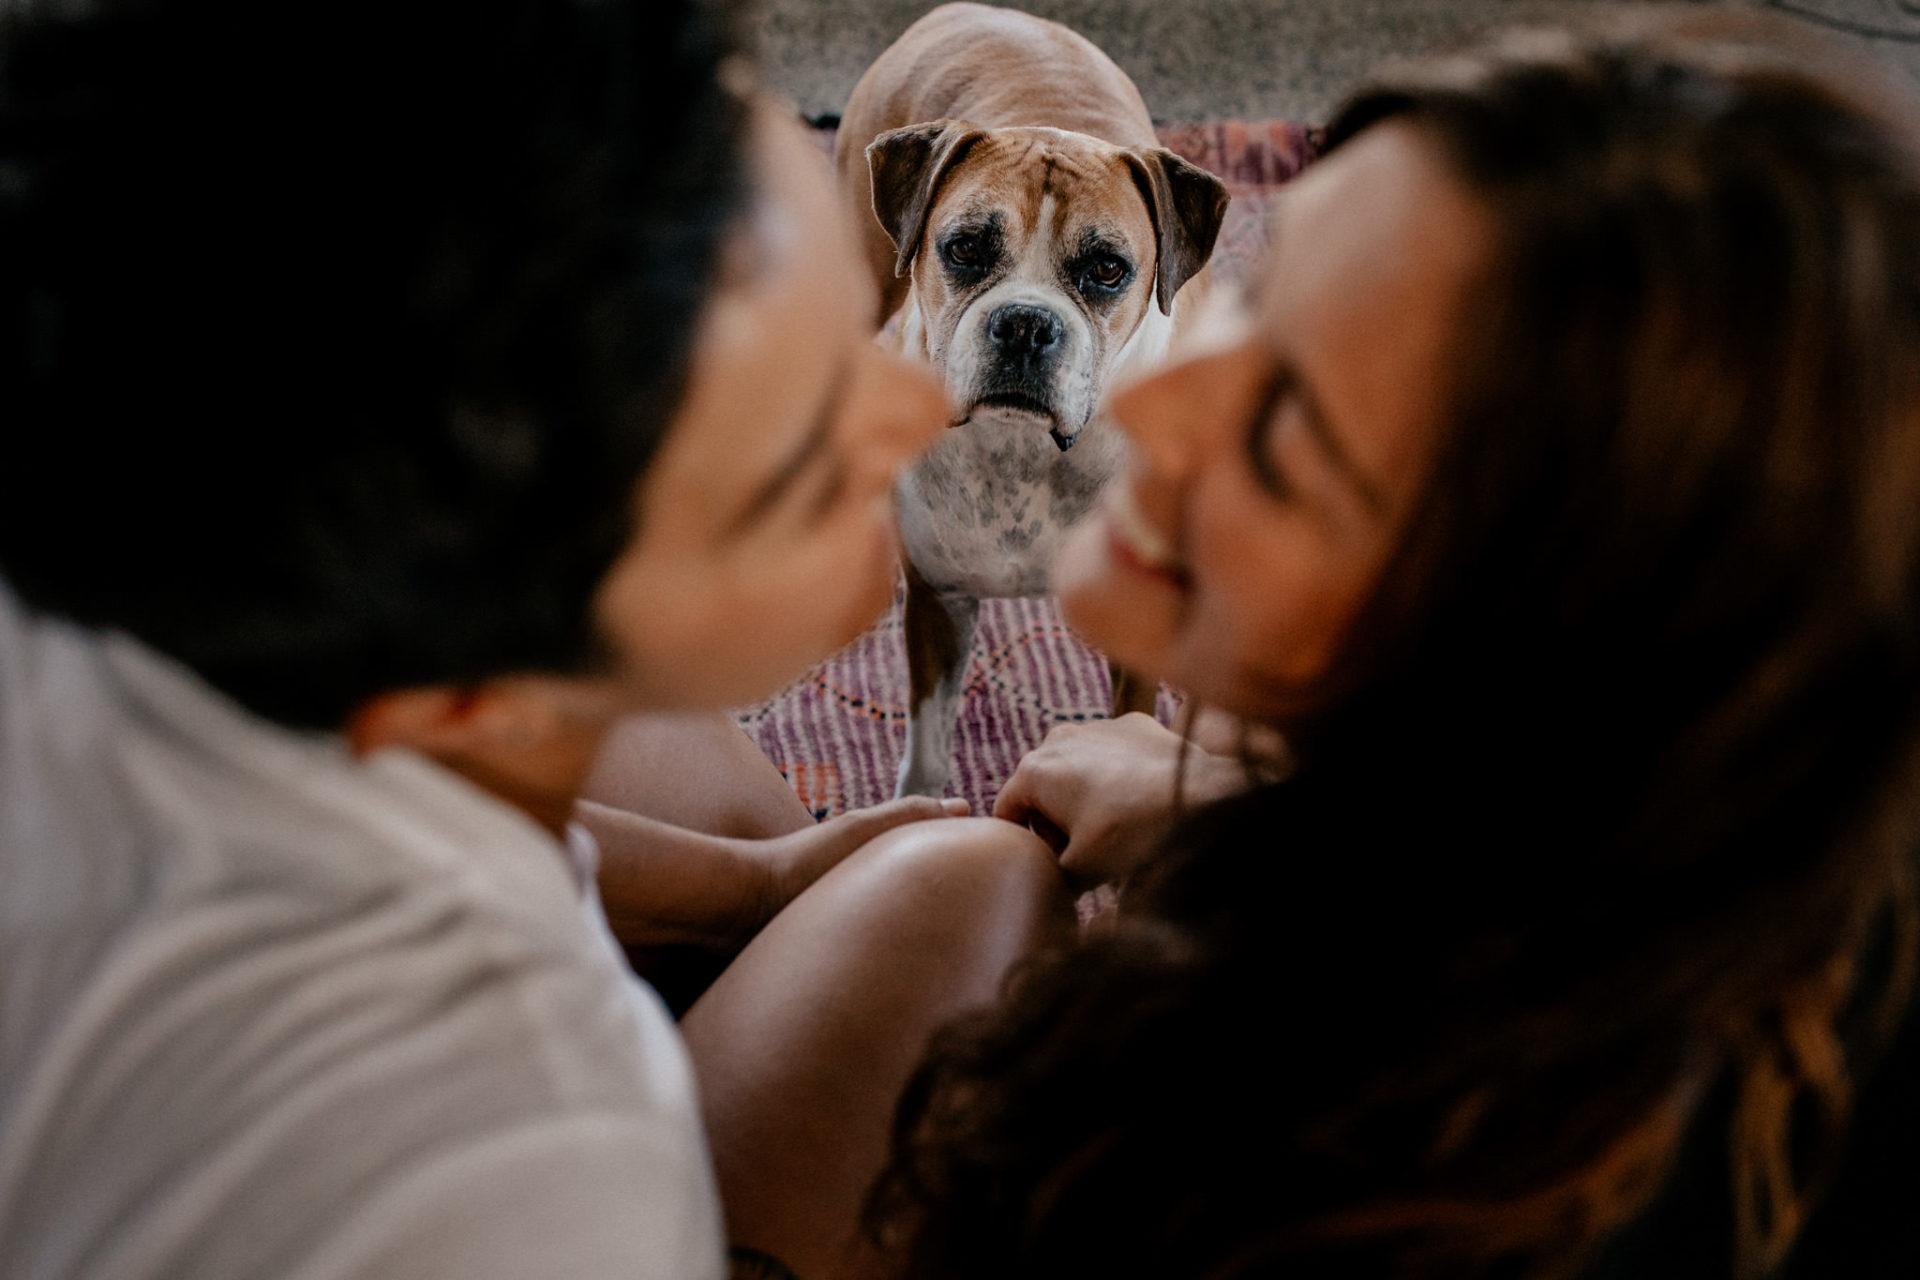 In Love Session Thornbury-engagement photos-home-story-couple shoot-lesbian couple with dog-lgbtq-friendly-wedding-photographer-melbourne